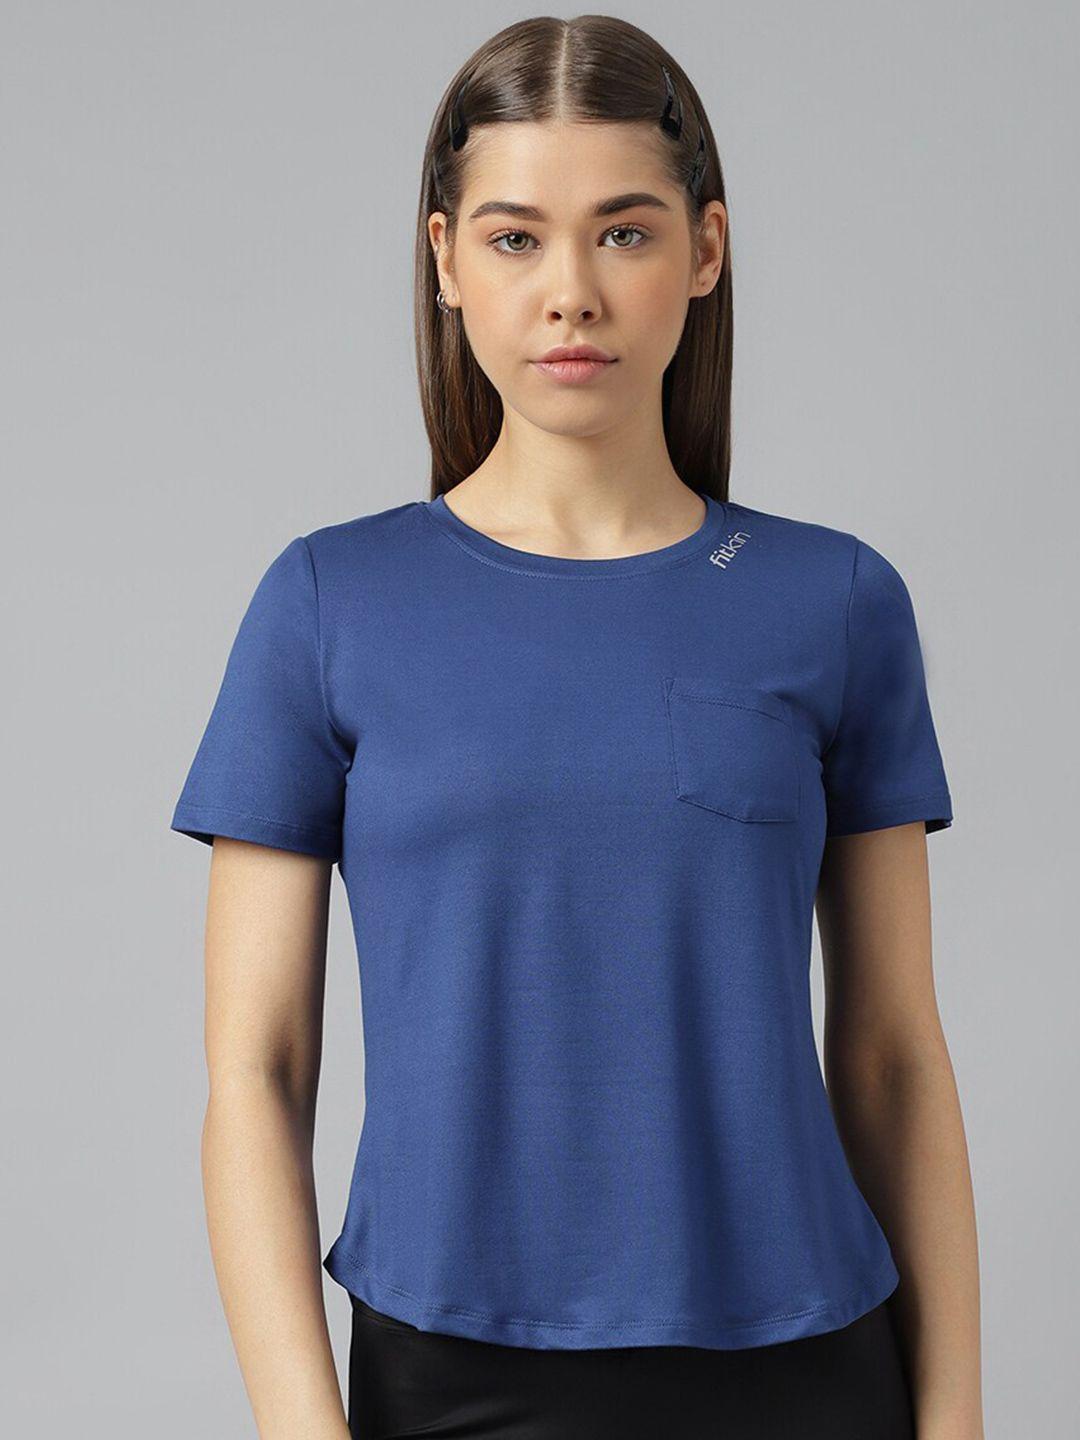 fitkin anti odour cut out detail relaxed fit sport t-shirt